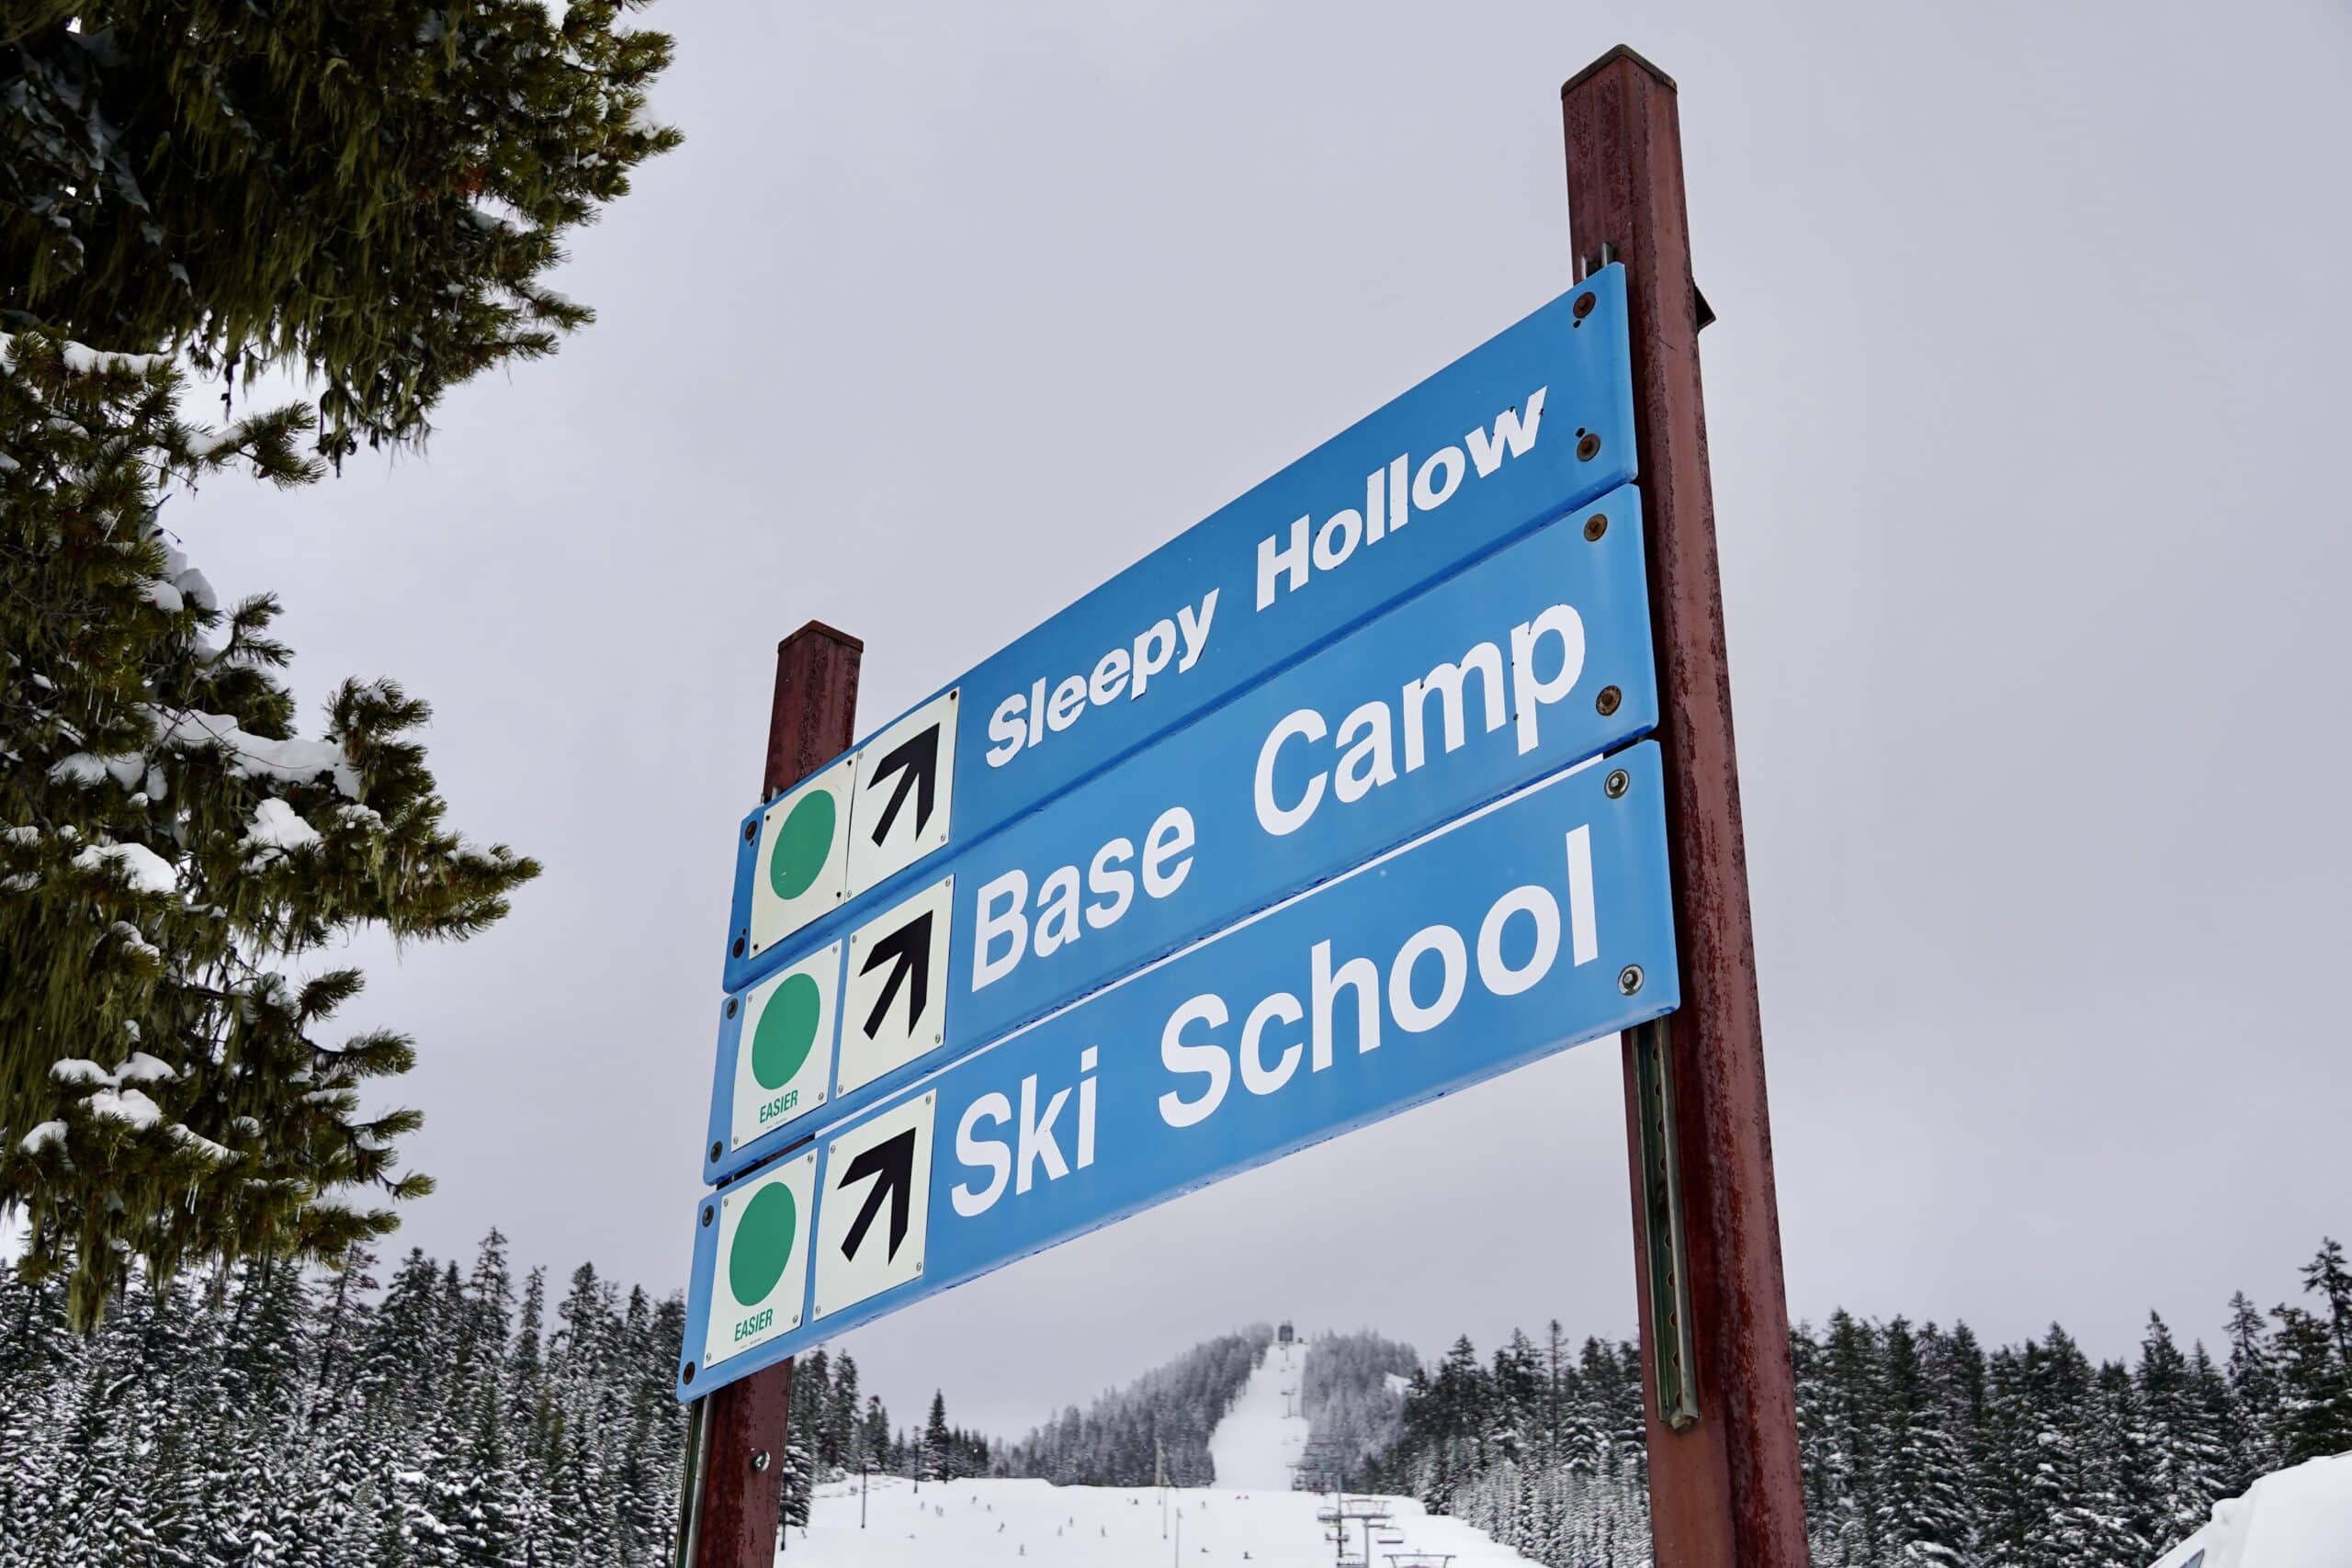 Beginner terrain and lesson area sign at Willamette Pass